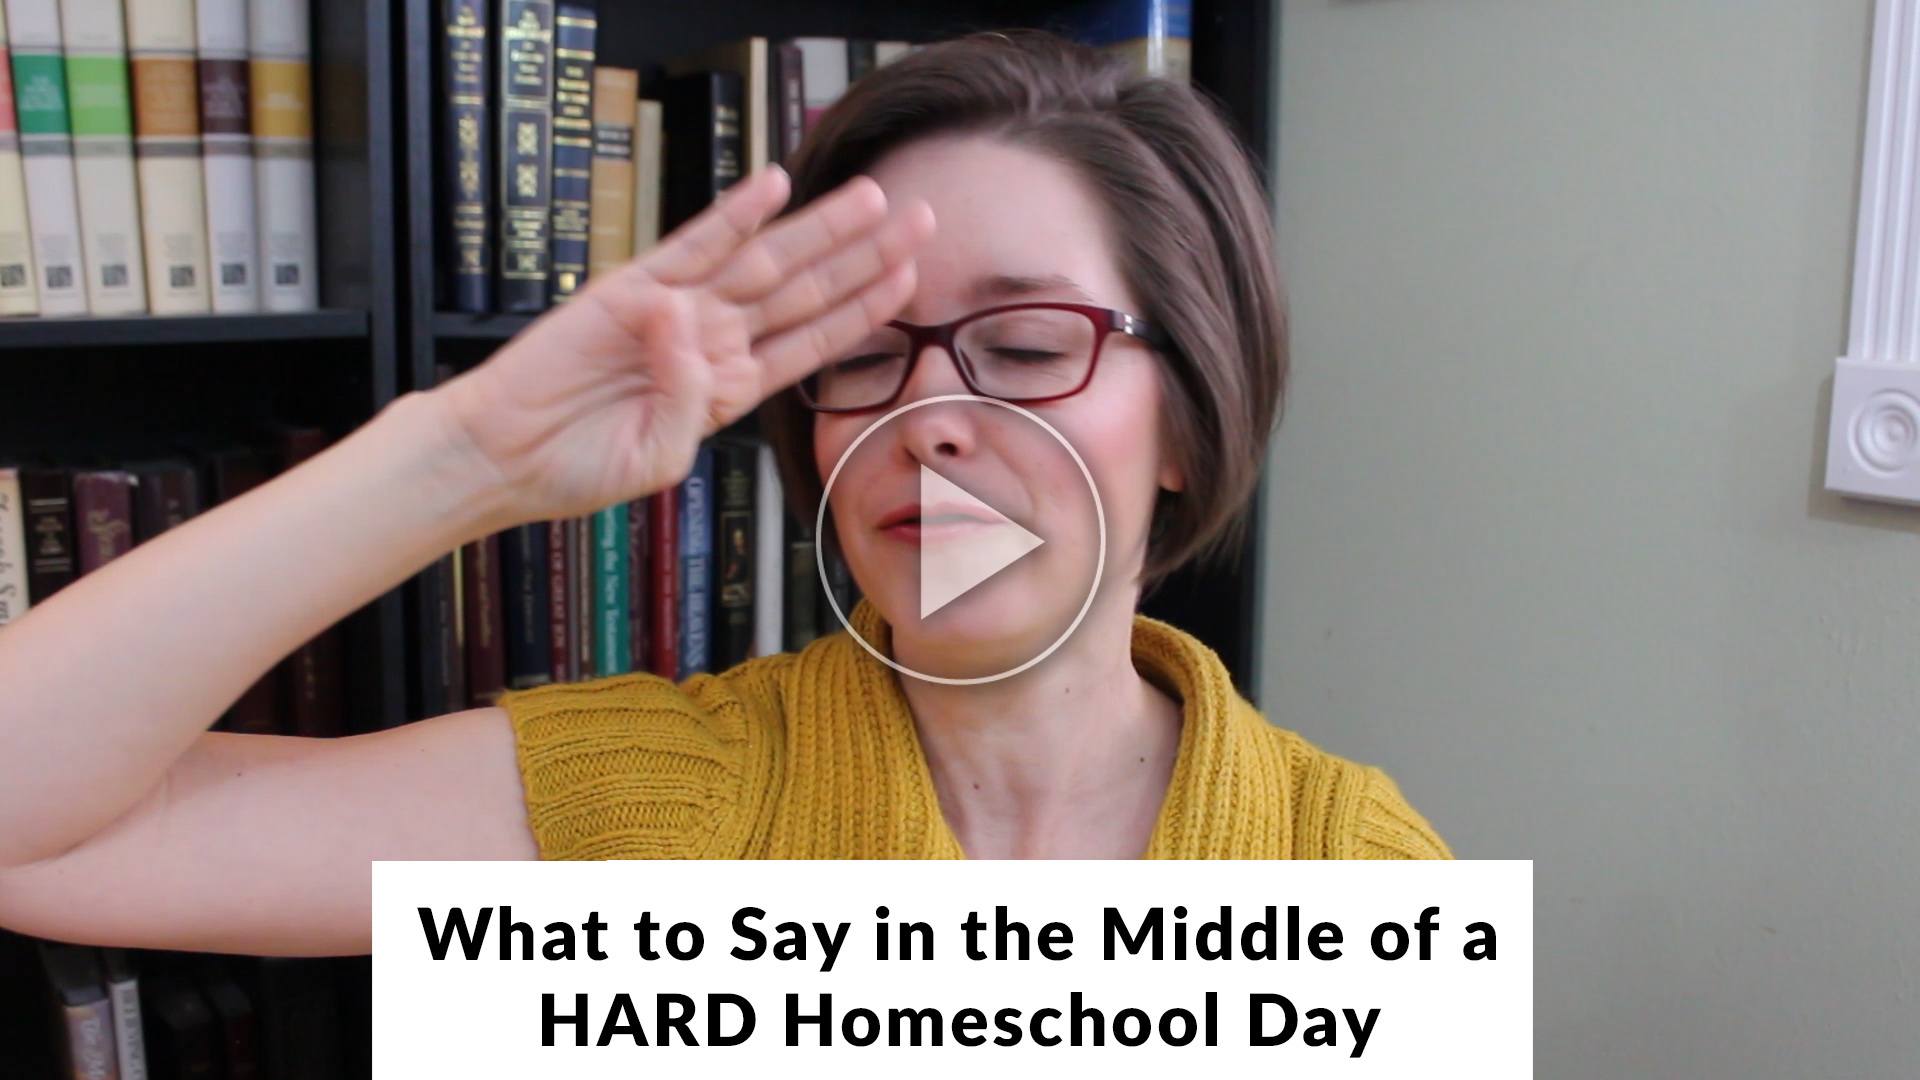 What to Say in the Middle of a Hard Homeschool Day